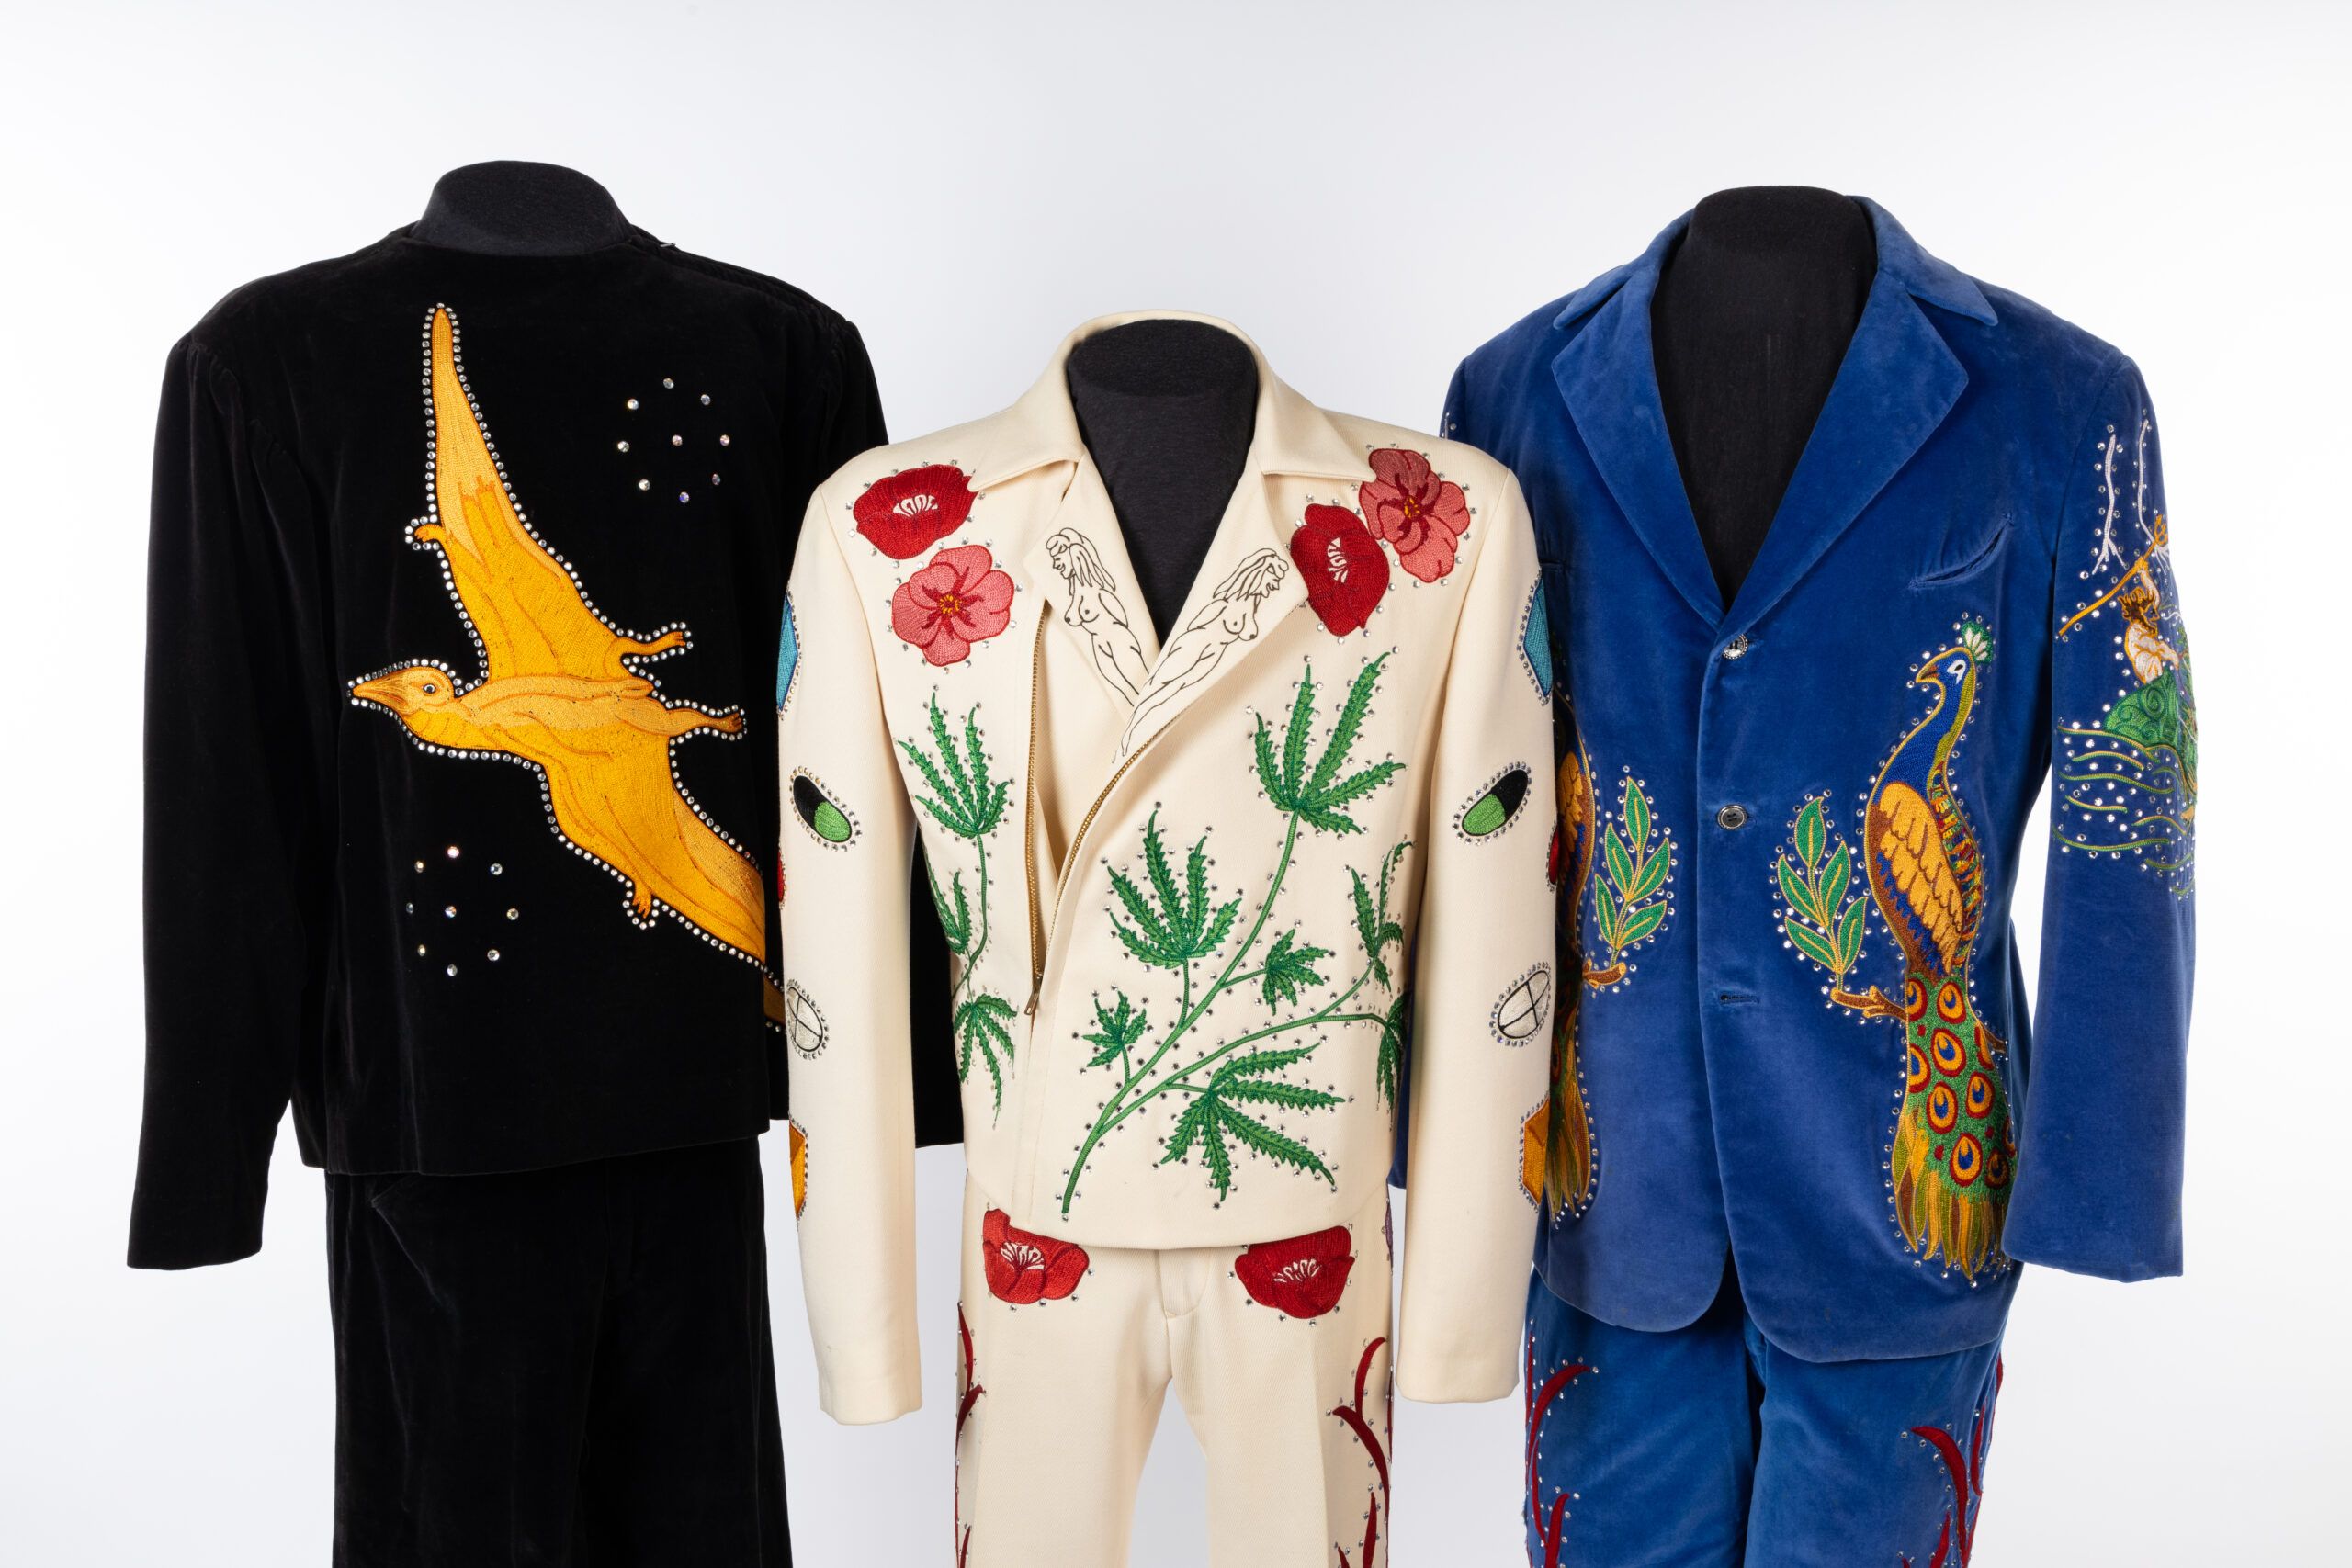 Flying Burrito Brothers' stage outfits.